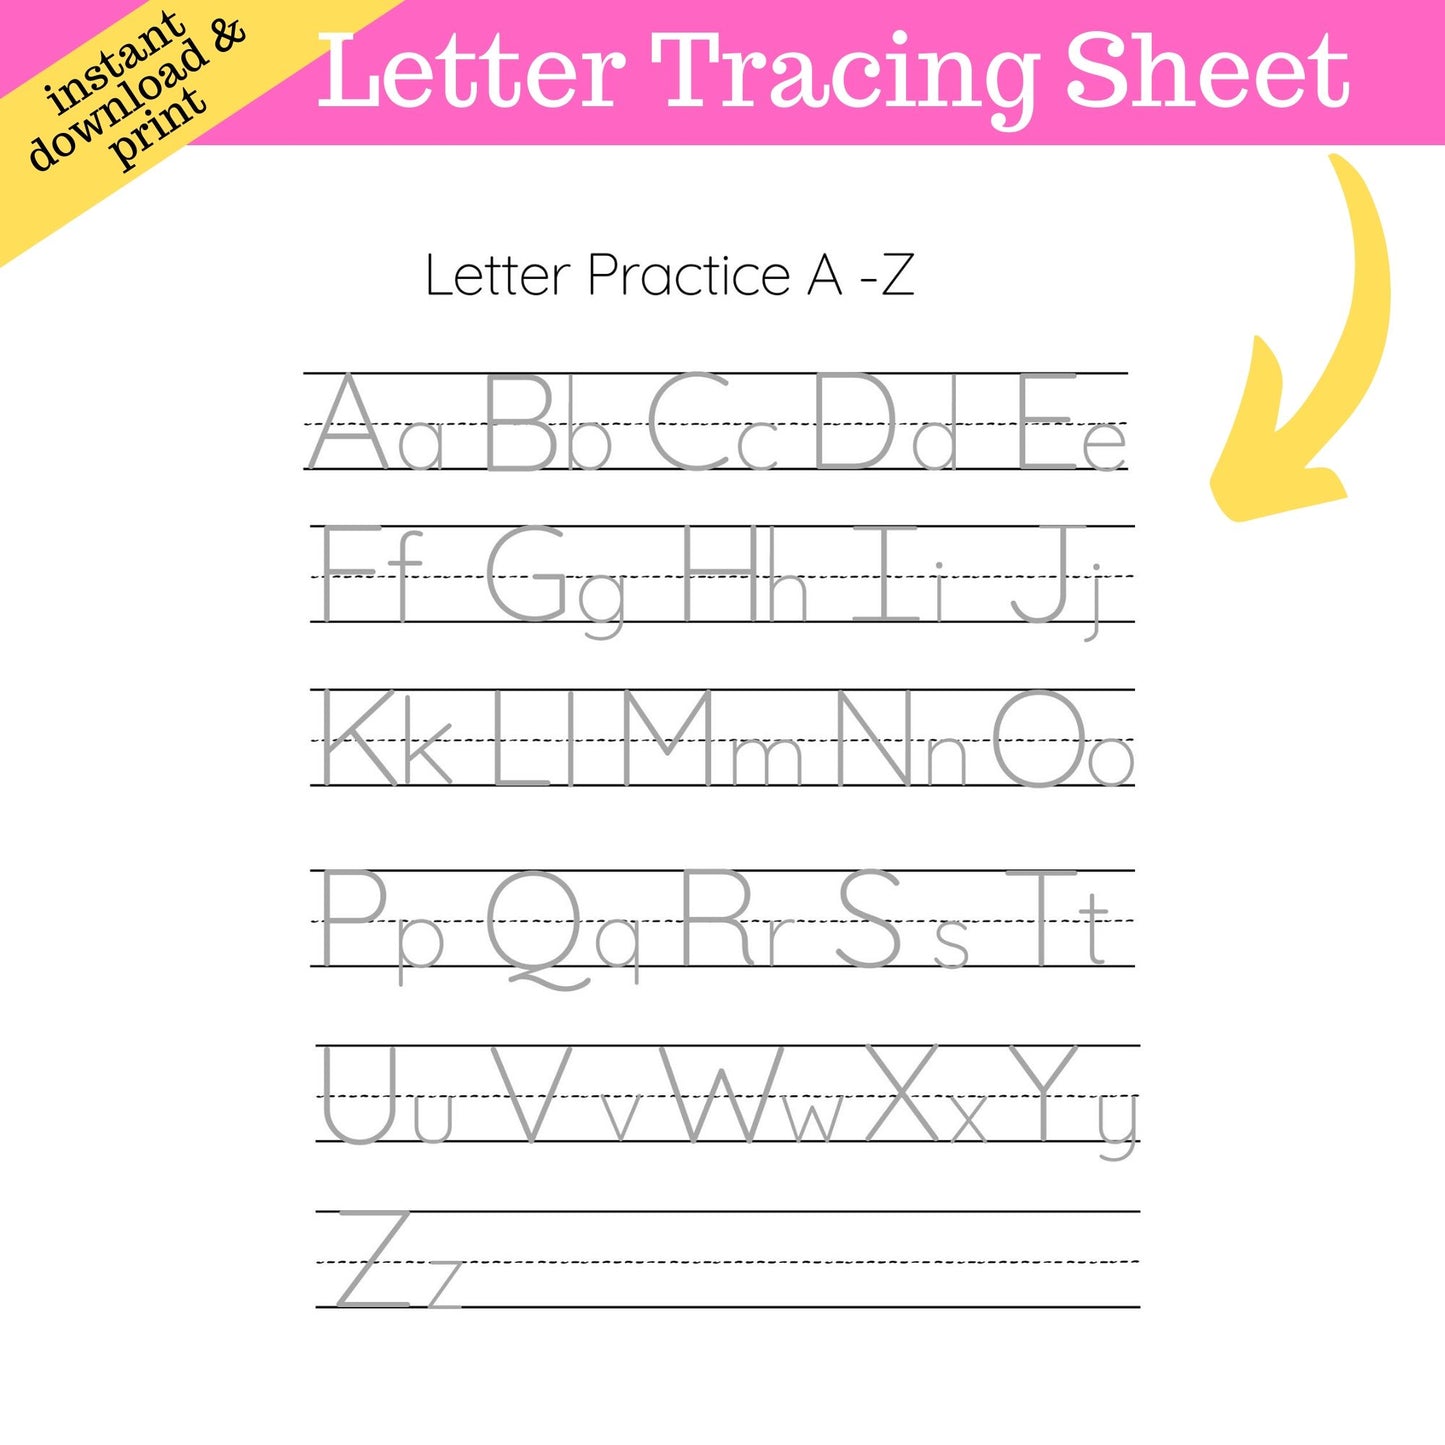 Letter Tracing Sheet for Alphabet Letters A-Z